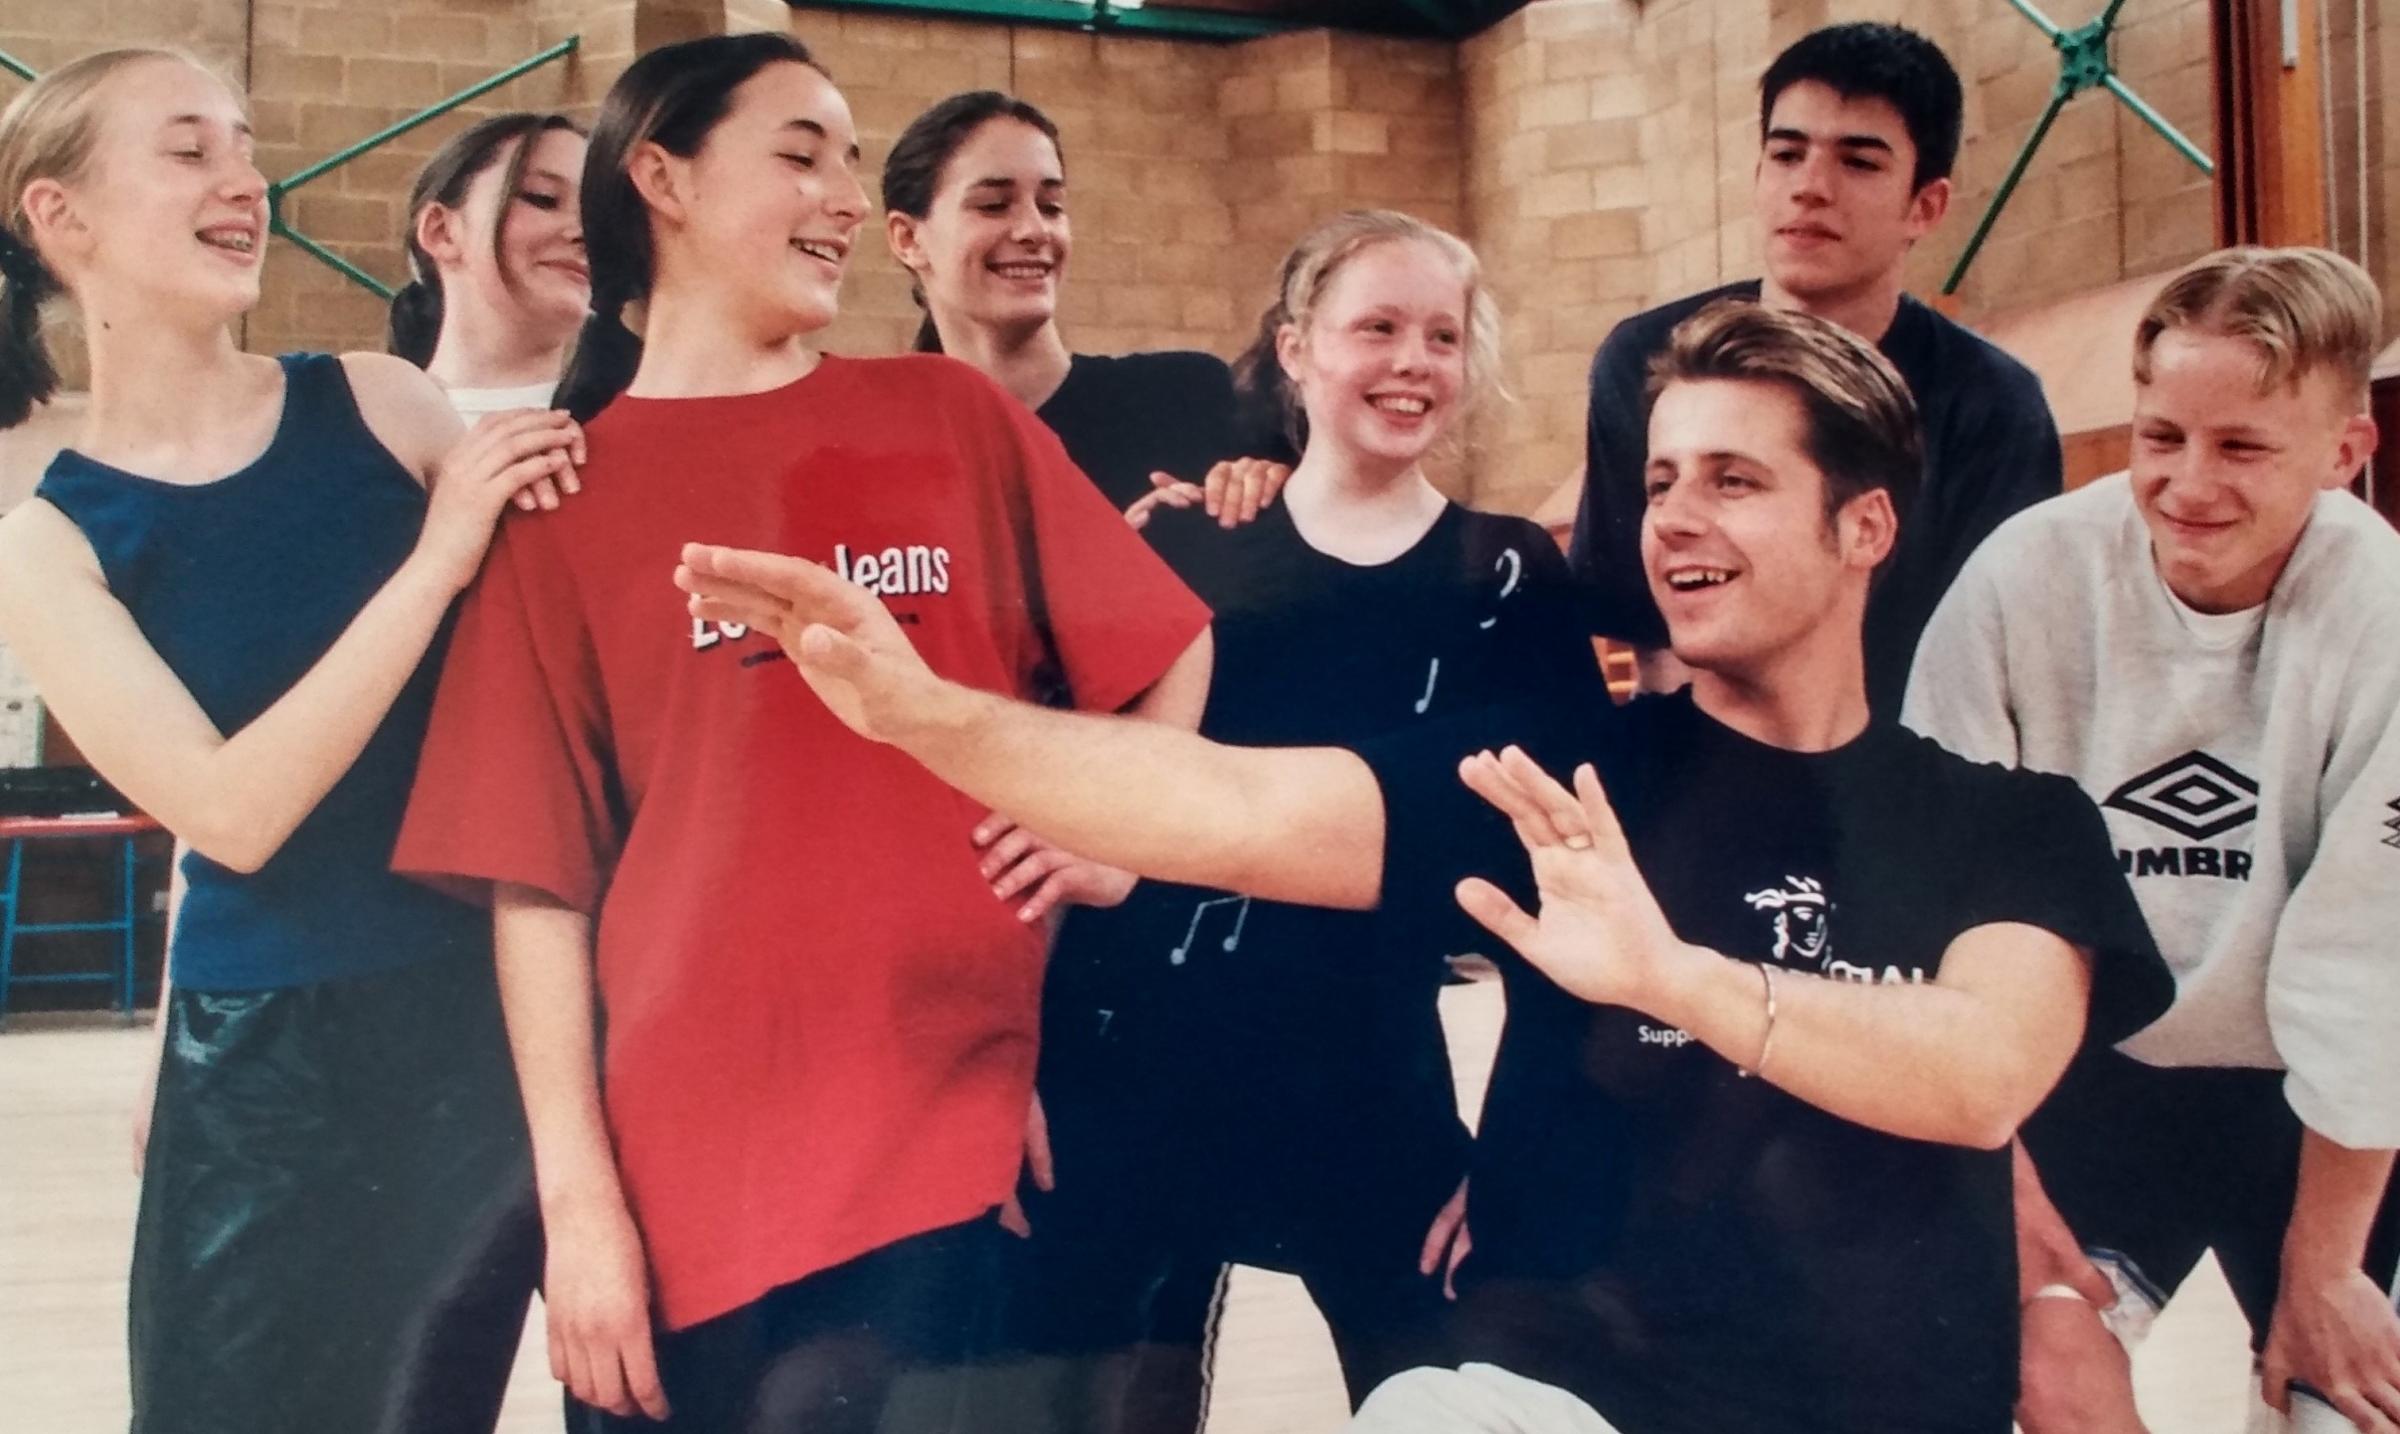 May 1997 and the Rambert Dance Company were at the school offering tips to get to the top